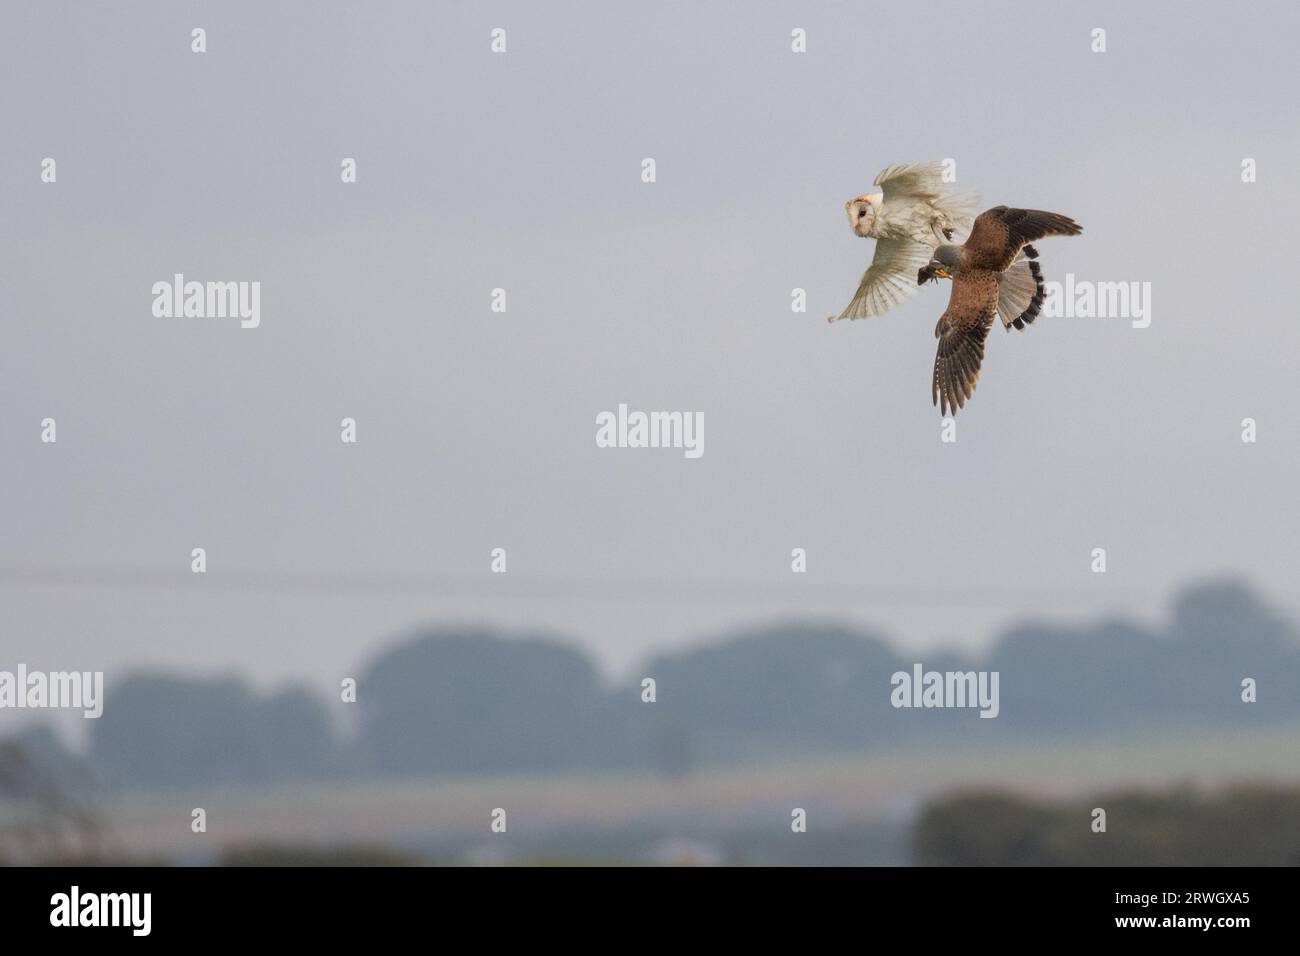 Kestrel (Falco tinnunculus) steals a vole from a barn owl (Tyto alba) in a mid-air tussle in Flamborough, East Riding of Yorkshire, England, UK wildli Stock Photo